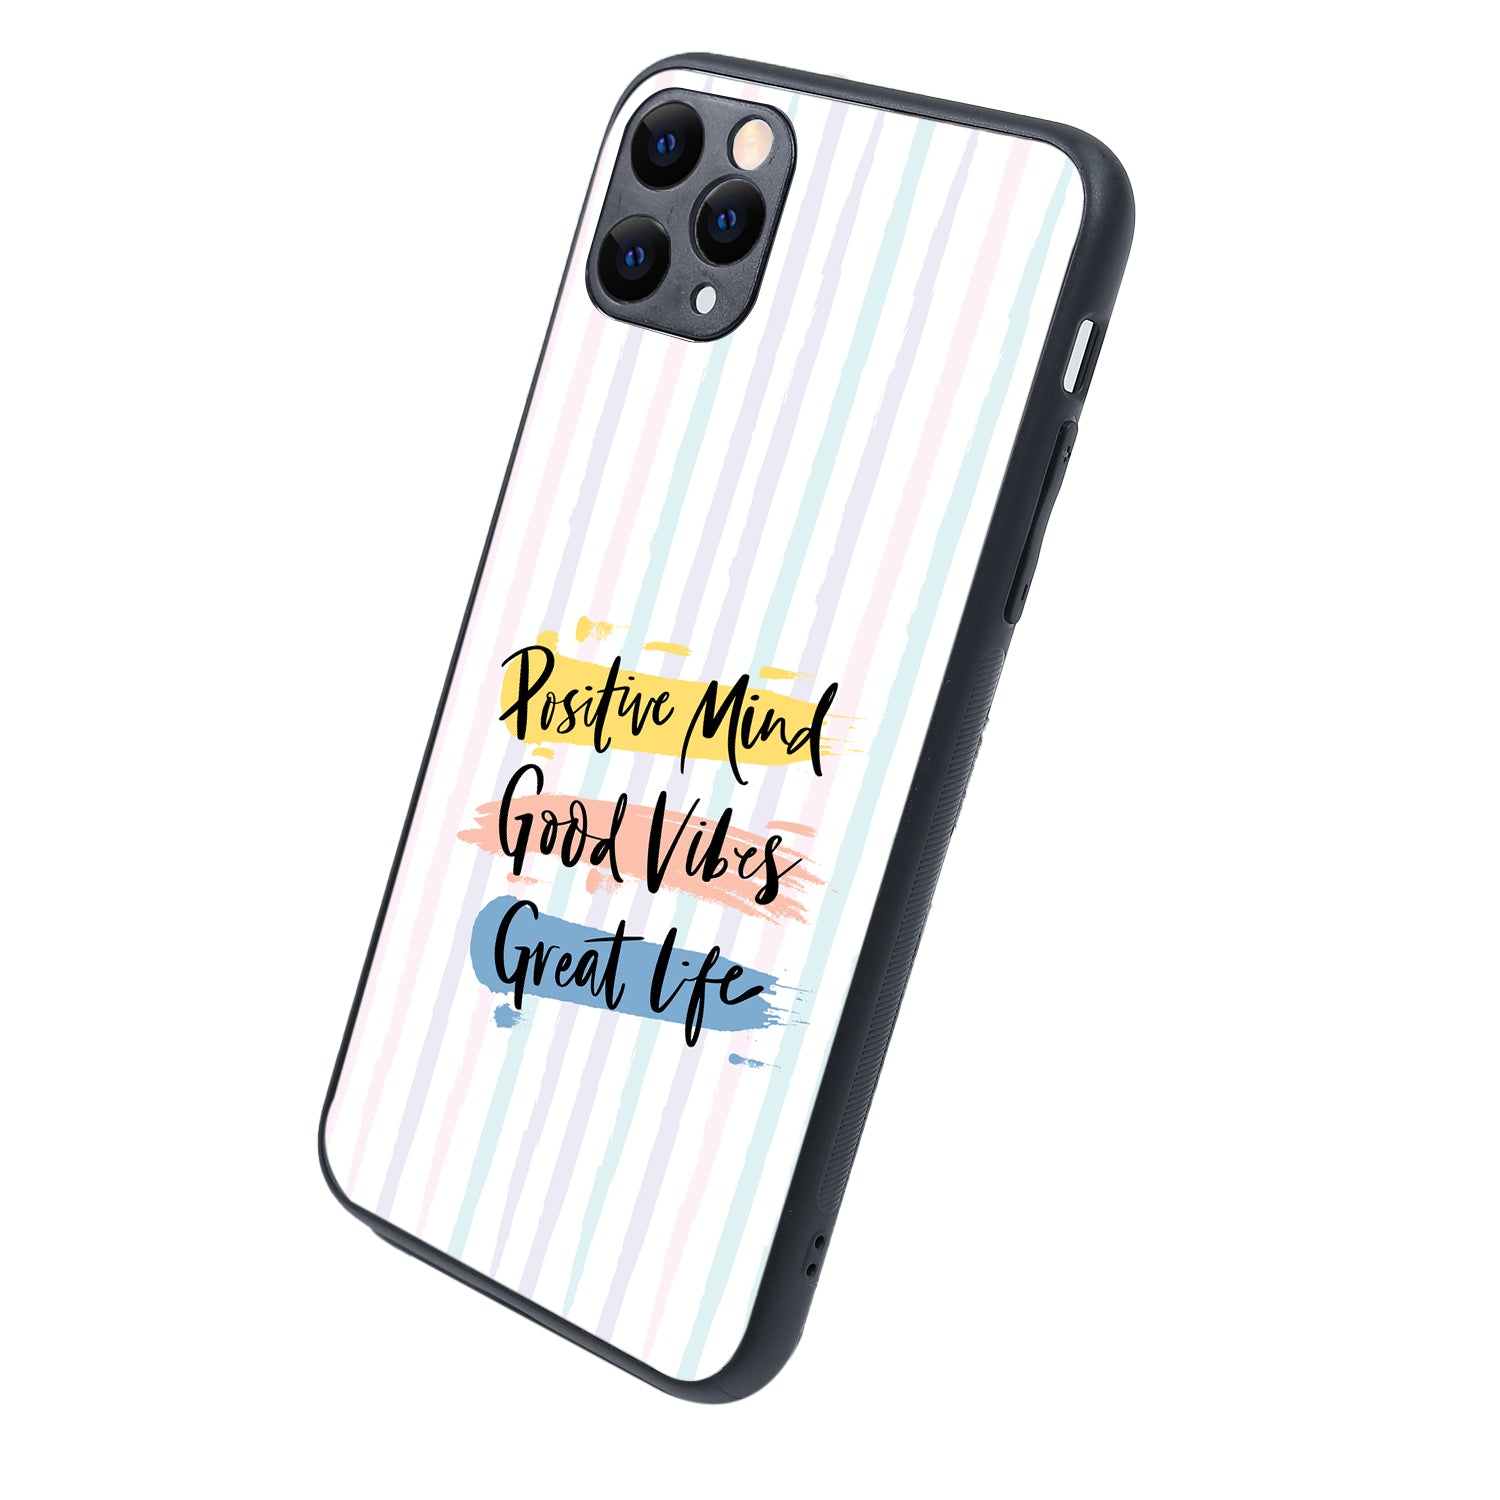 Great Life Motivational Quotes iPhone 11 Pro Max Case